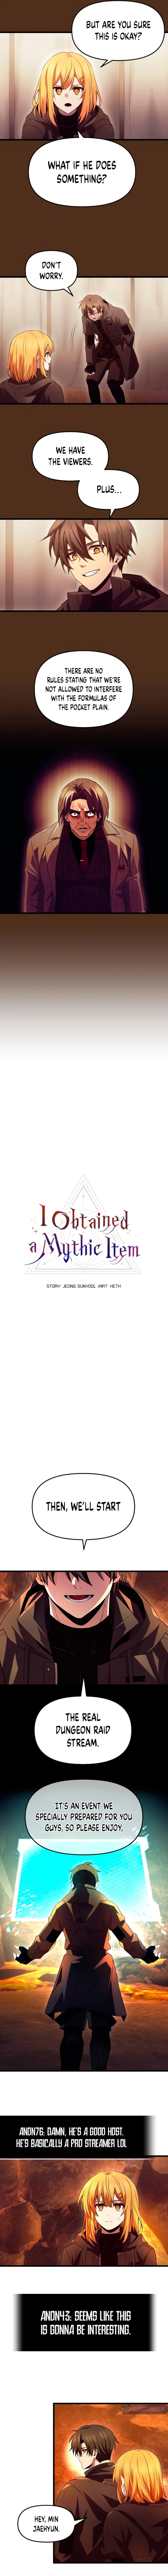 I Obtained a Mythic Item - Chapter 72 Page 2